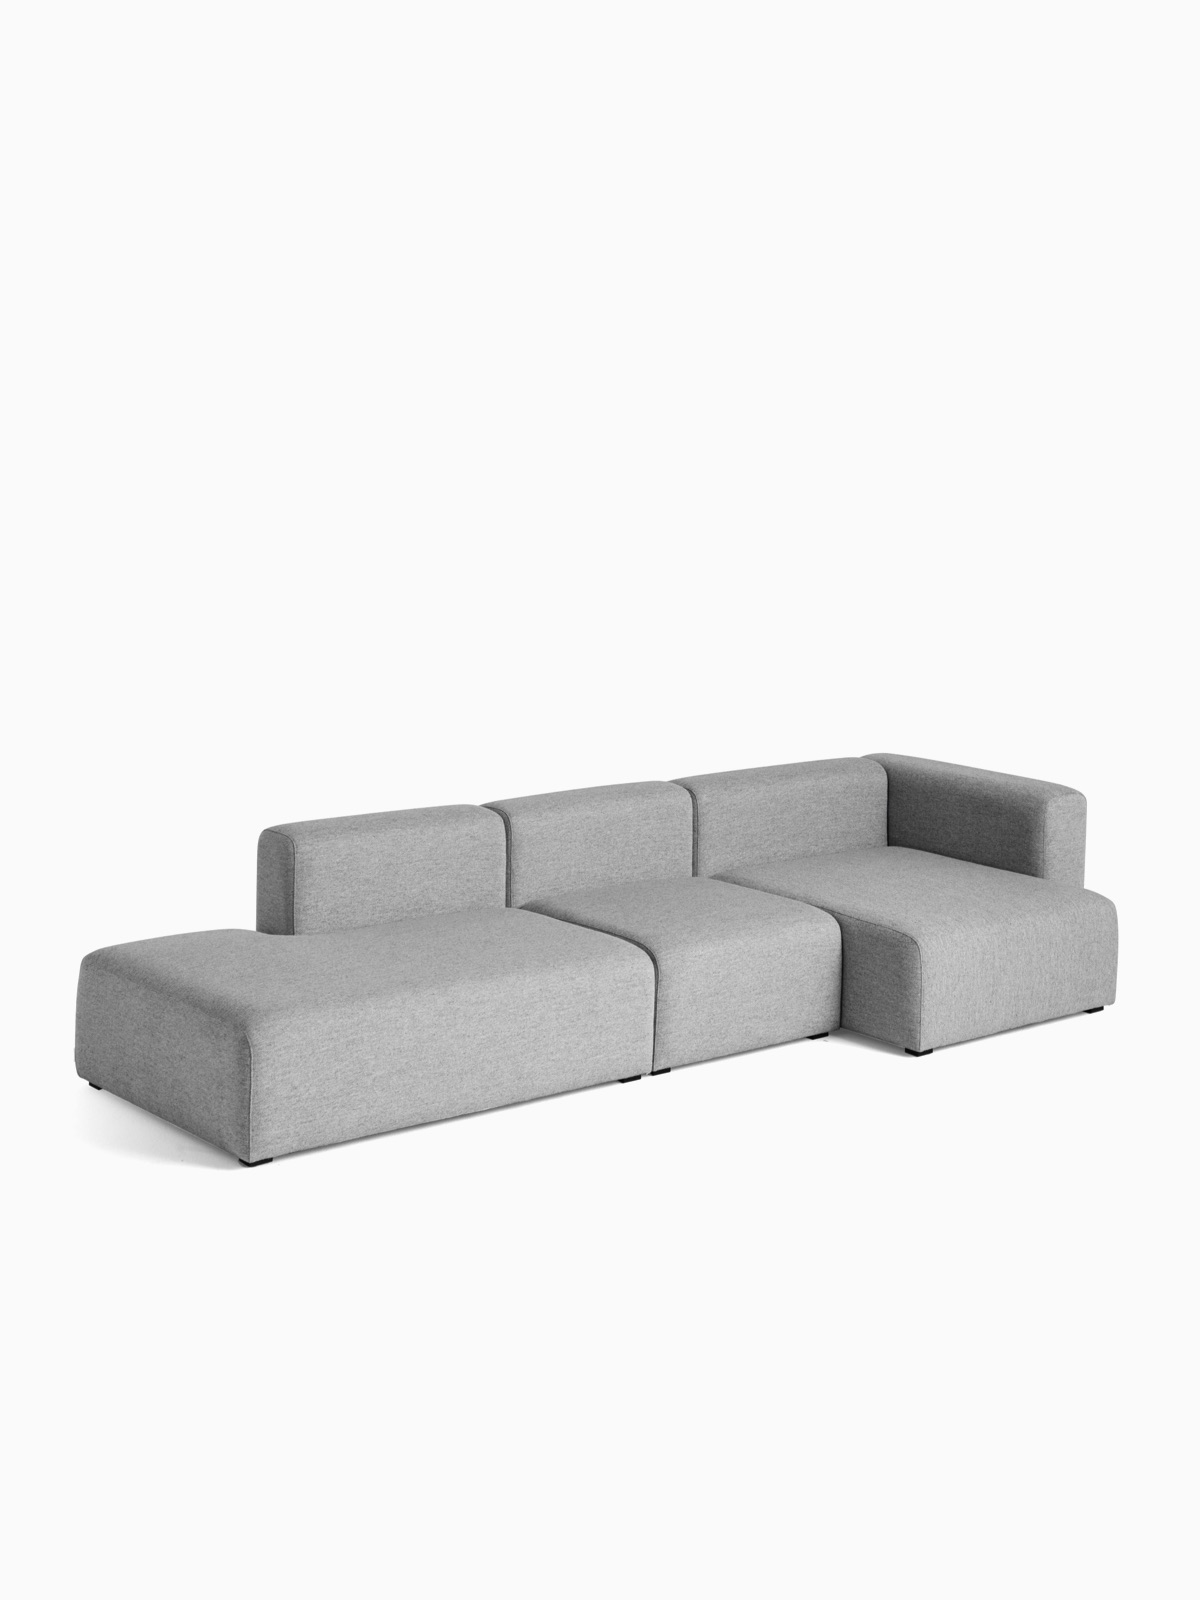 Mags Sectional Sofas